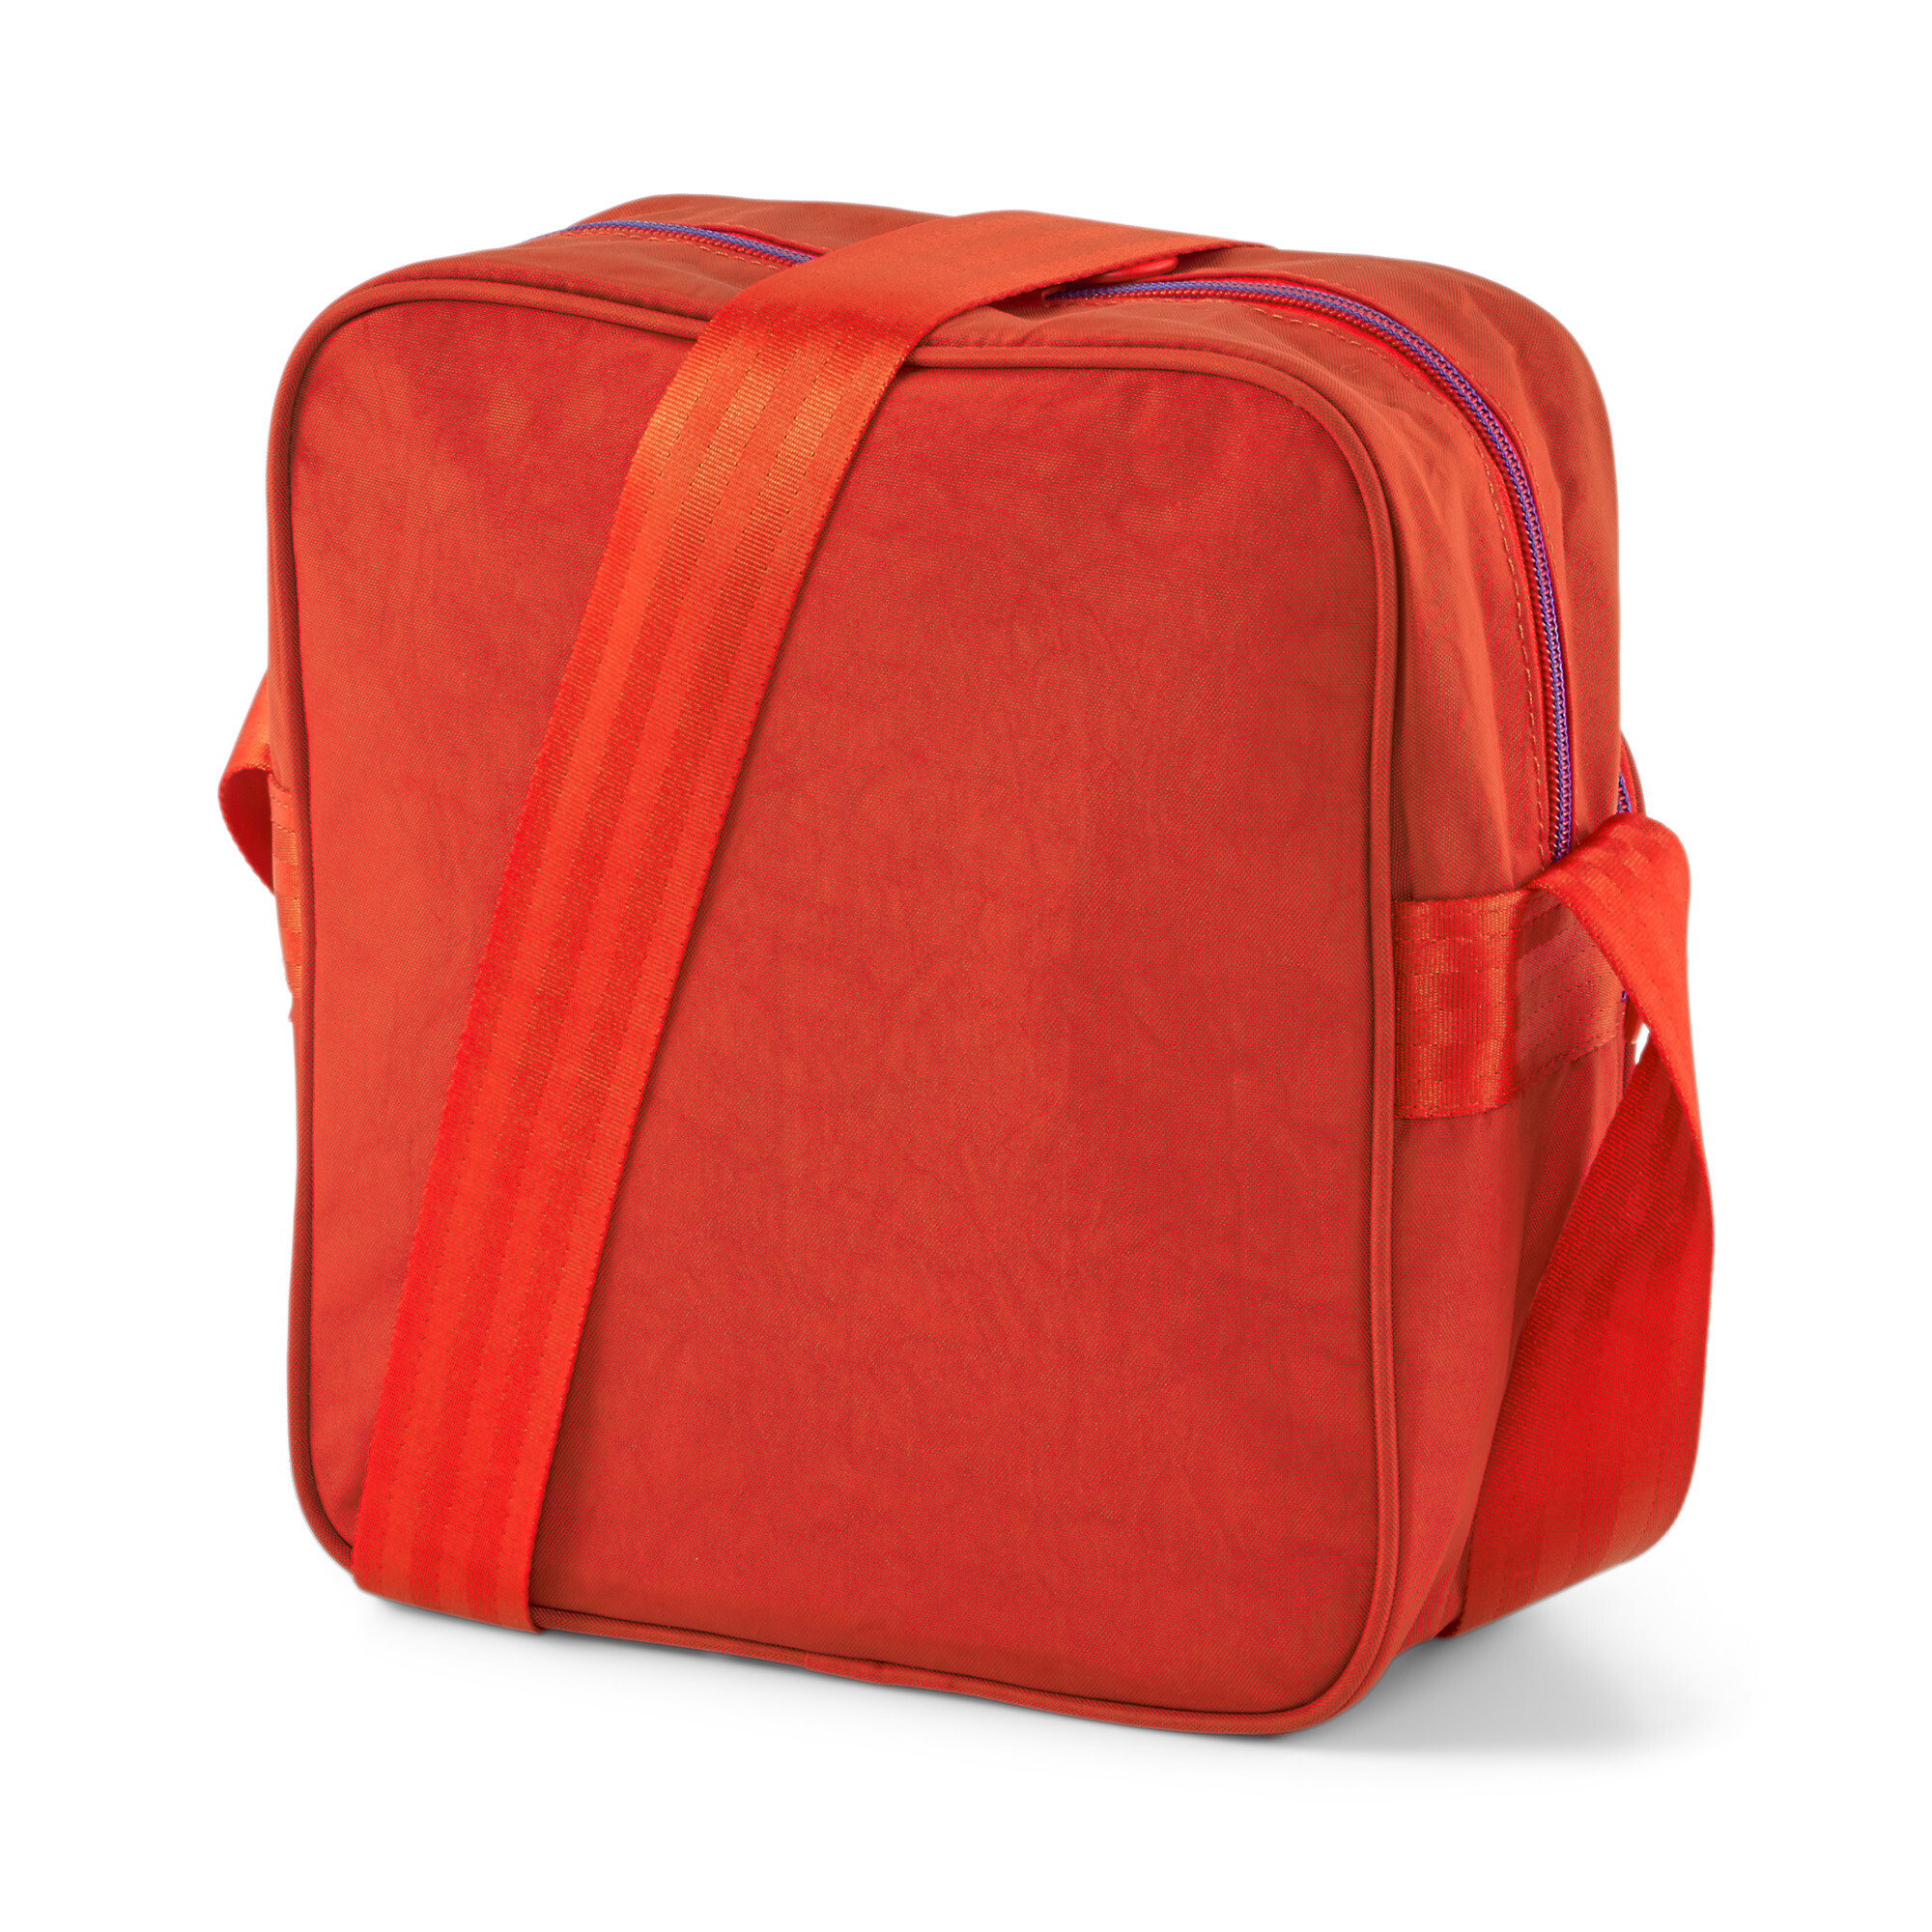 Men's PUMA Fast Track Portable Bag In Red